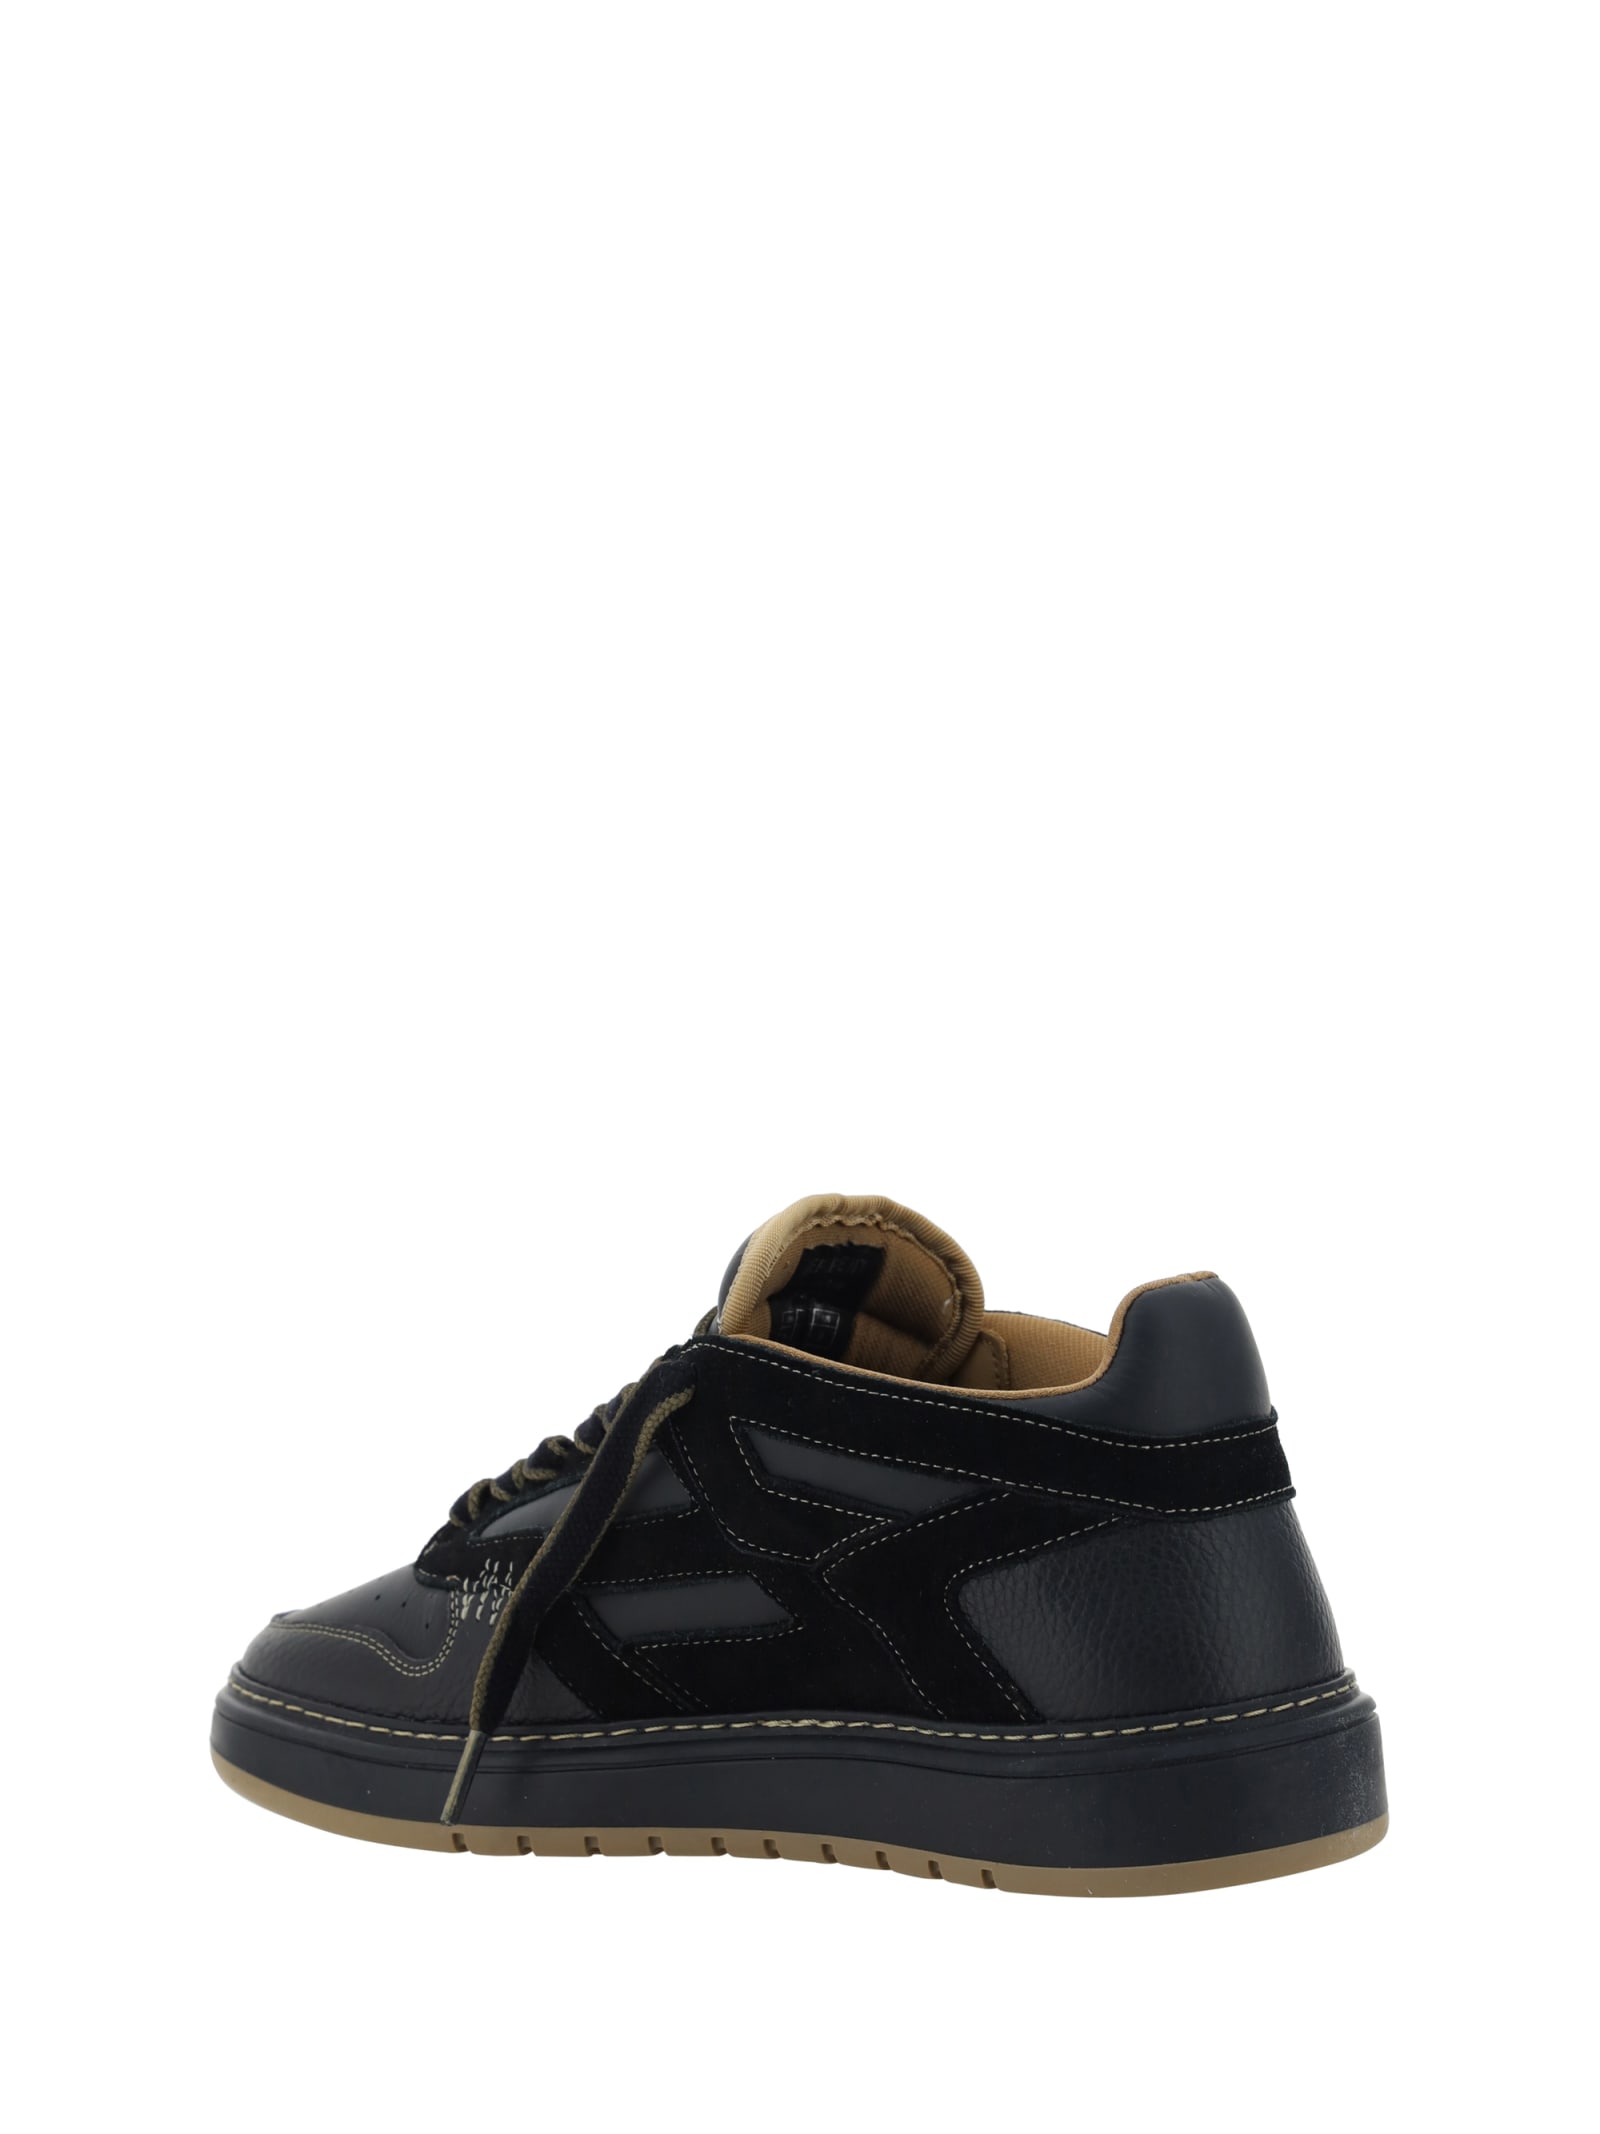 Shop Represent Reptor Sneakers In Black/washed Taupe